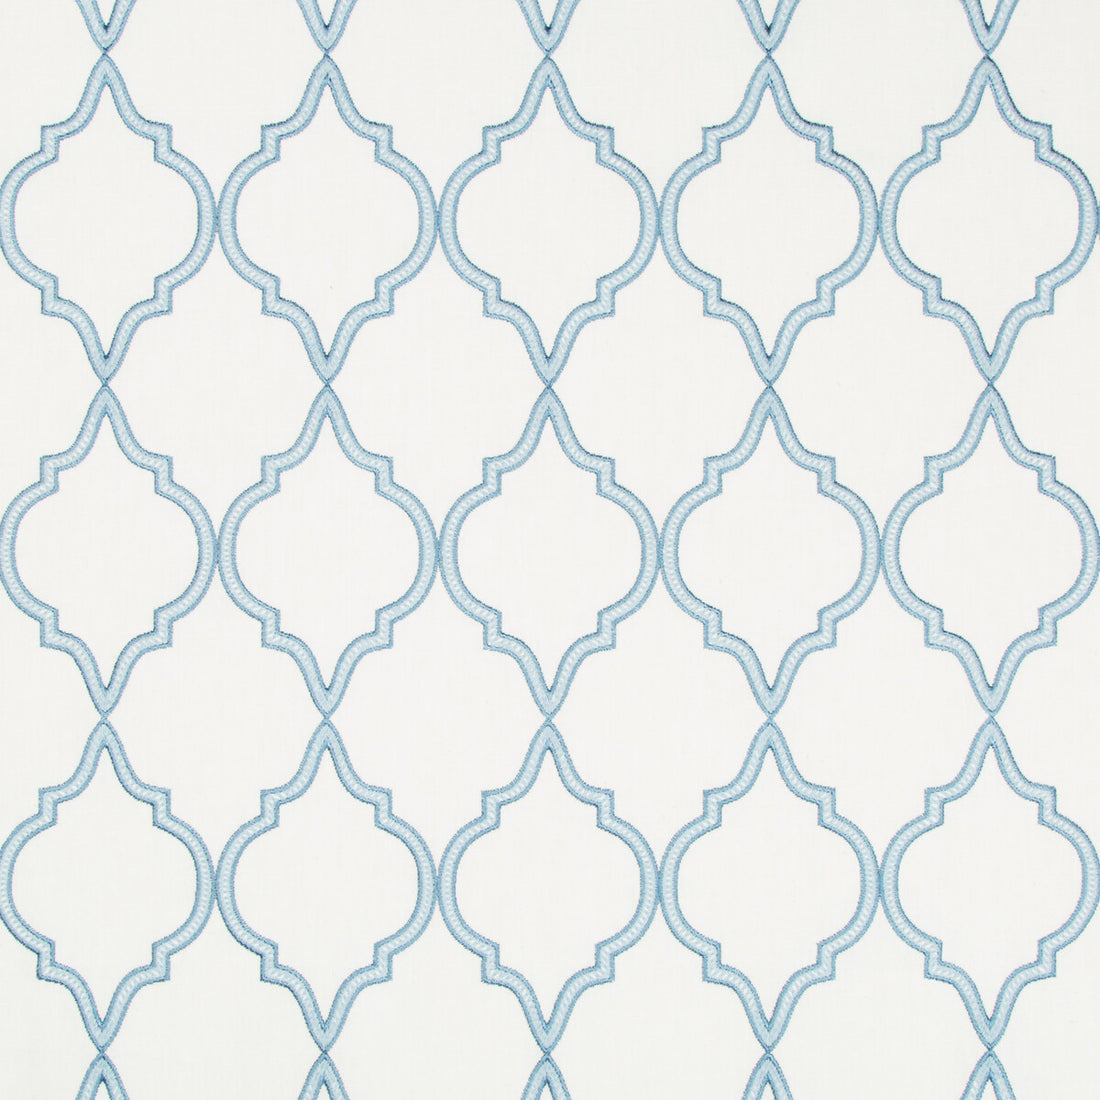 Highhope fabric in chambray color - pattern 35301.15.0 - by Kravet Basics in the Greenwich collection